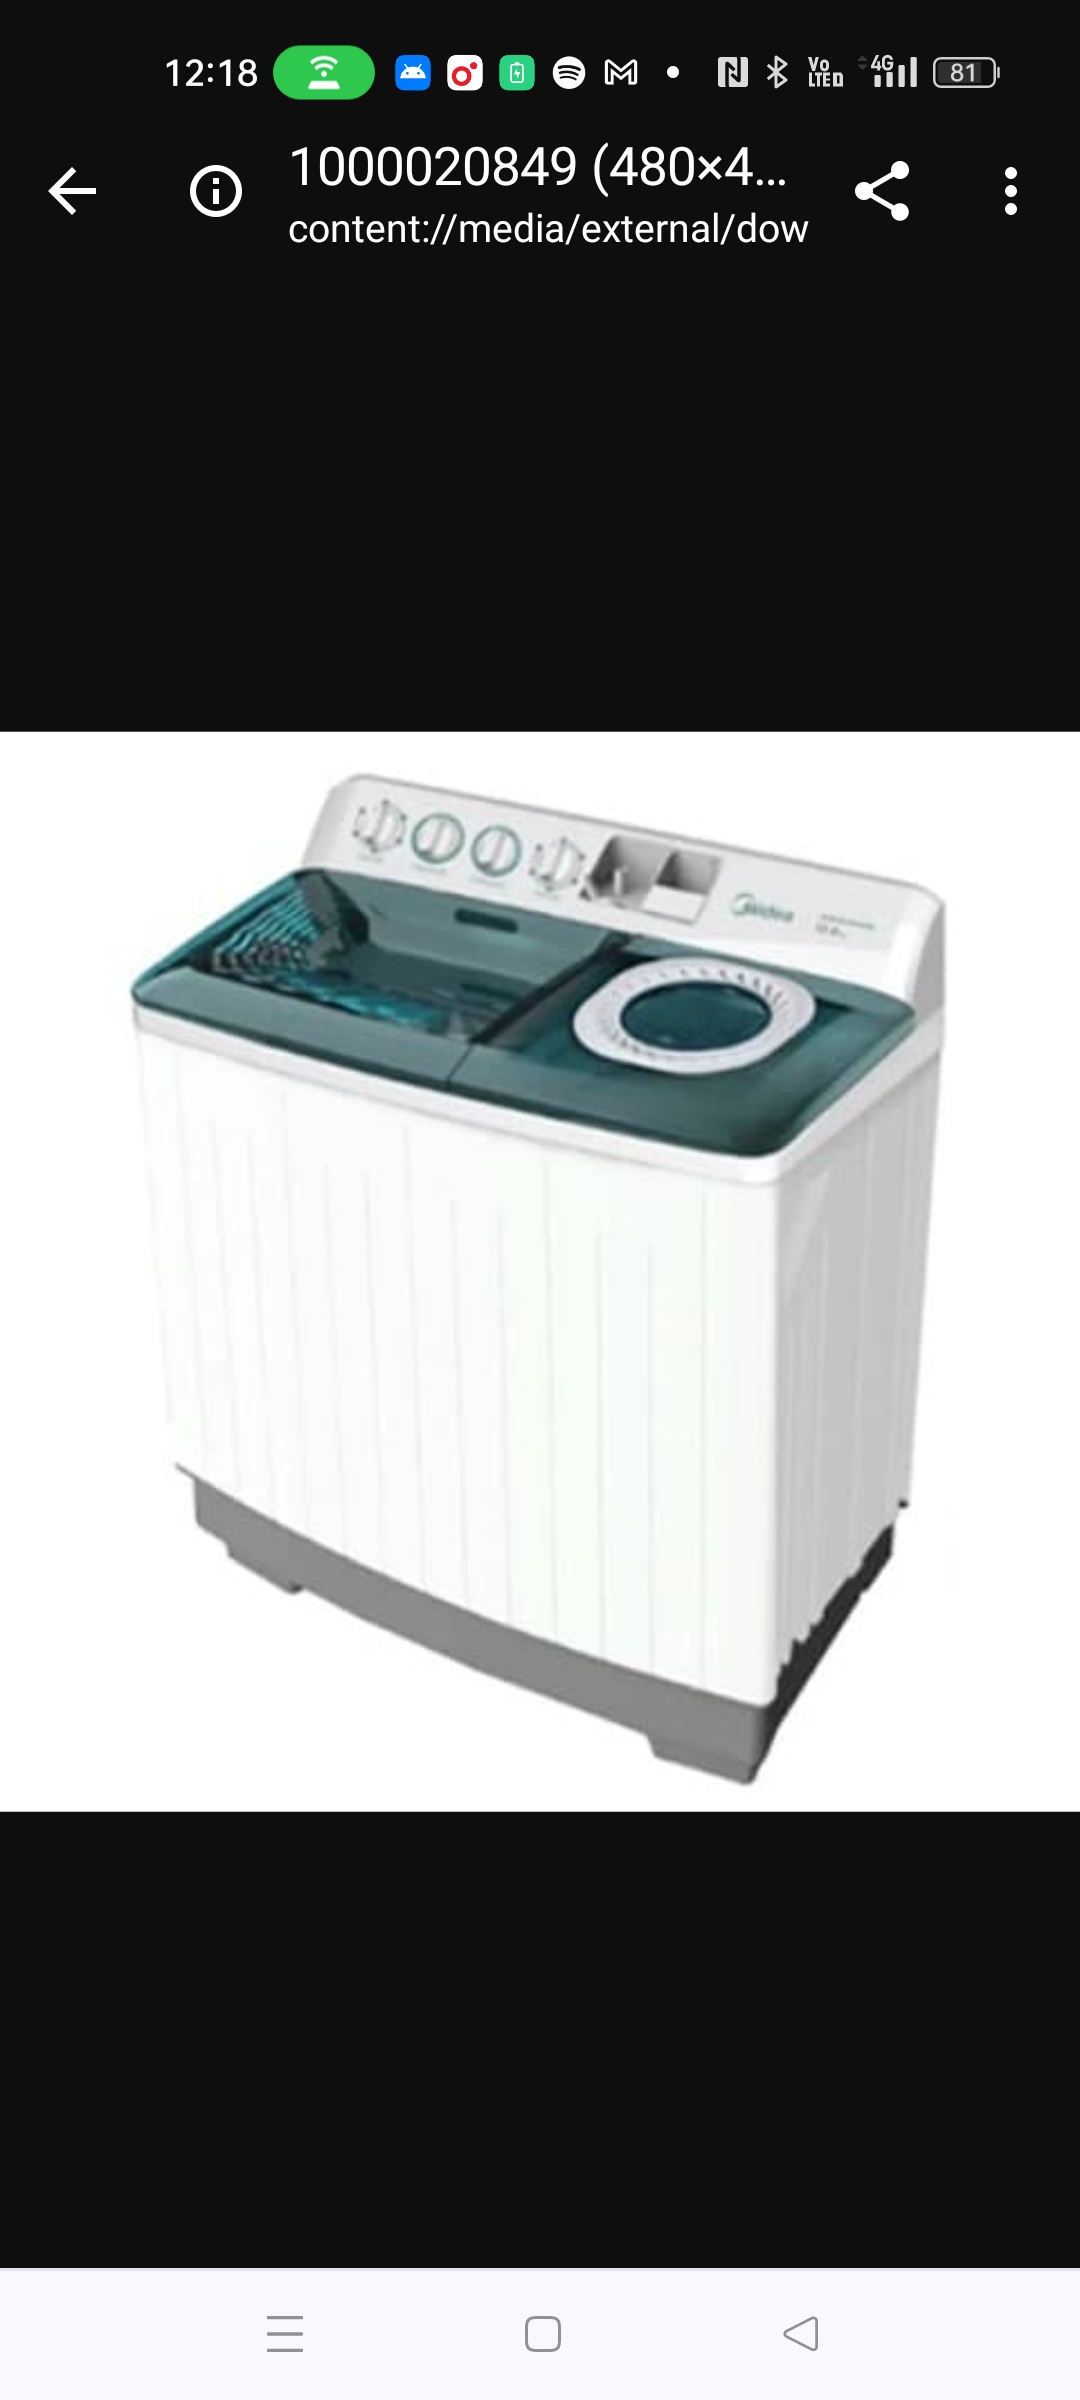 Washing Machine 7kg Semi Automatic for sale. 1 year old, Very good condition. 28 kd. Call 60767639